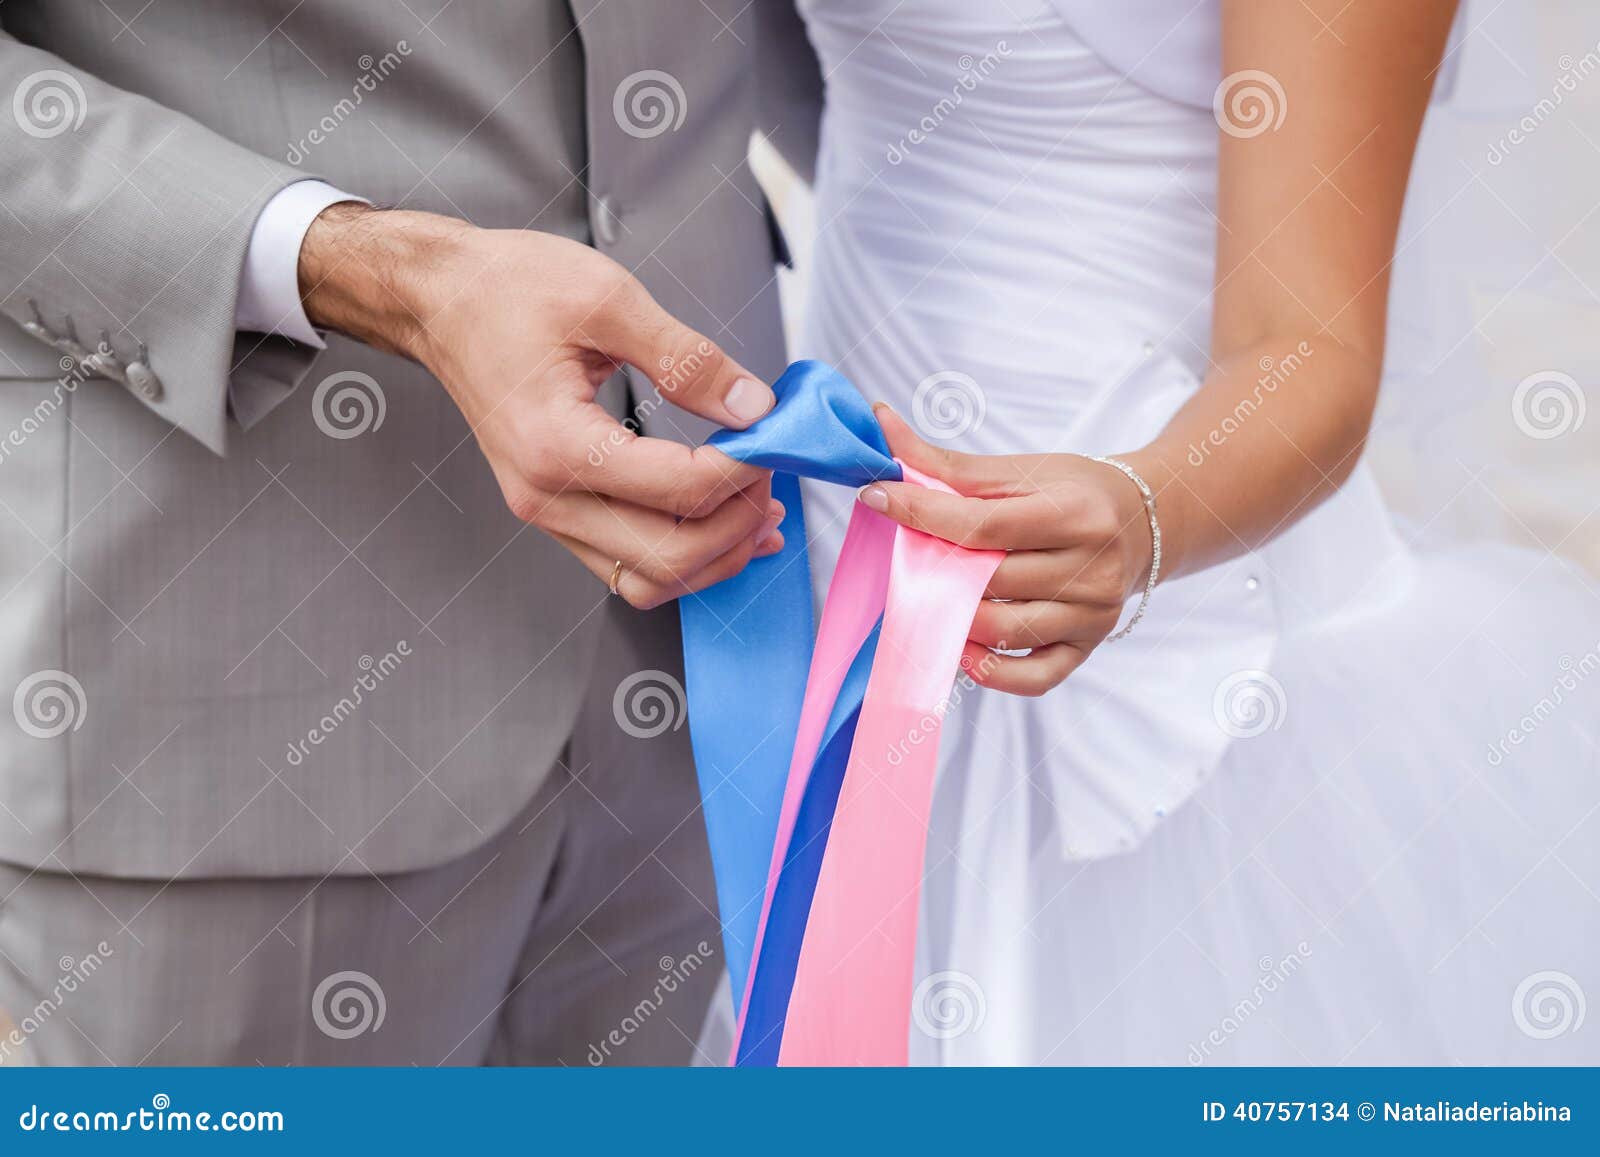 Just Married stock photo